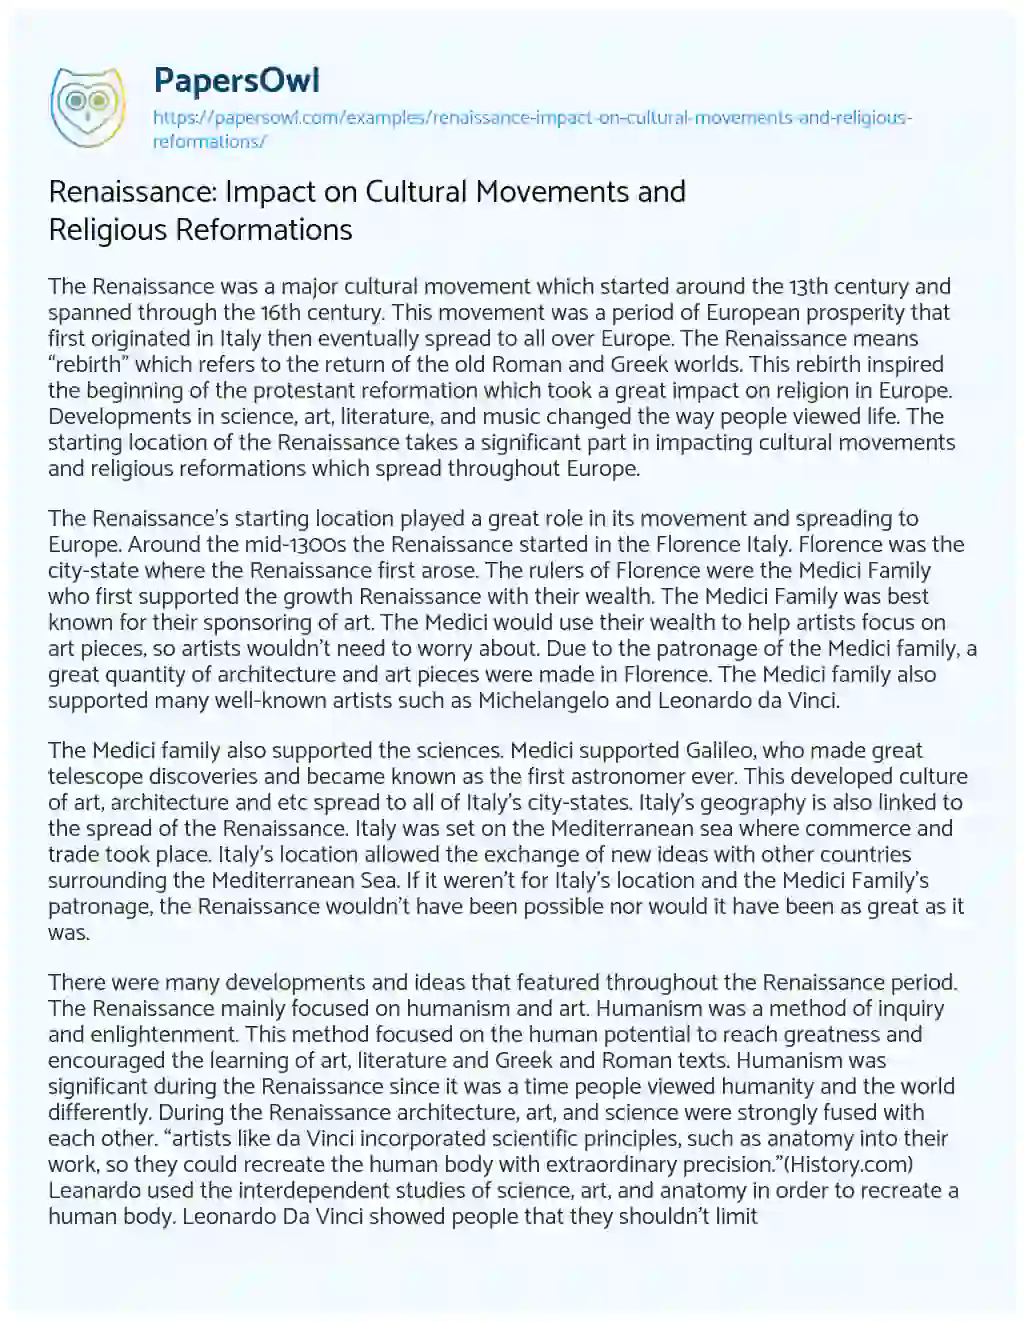 Essay on Renaissance: Impact on Cultural Movements and Religious Reformations